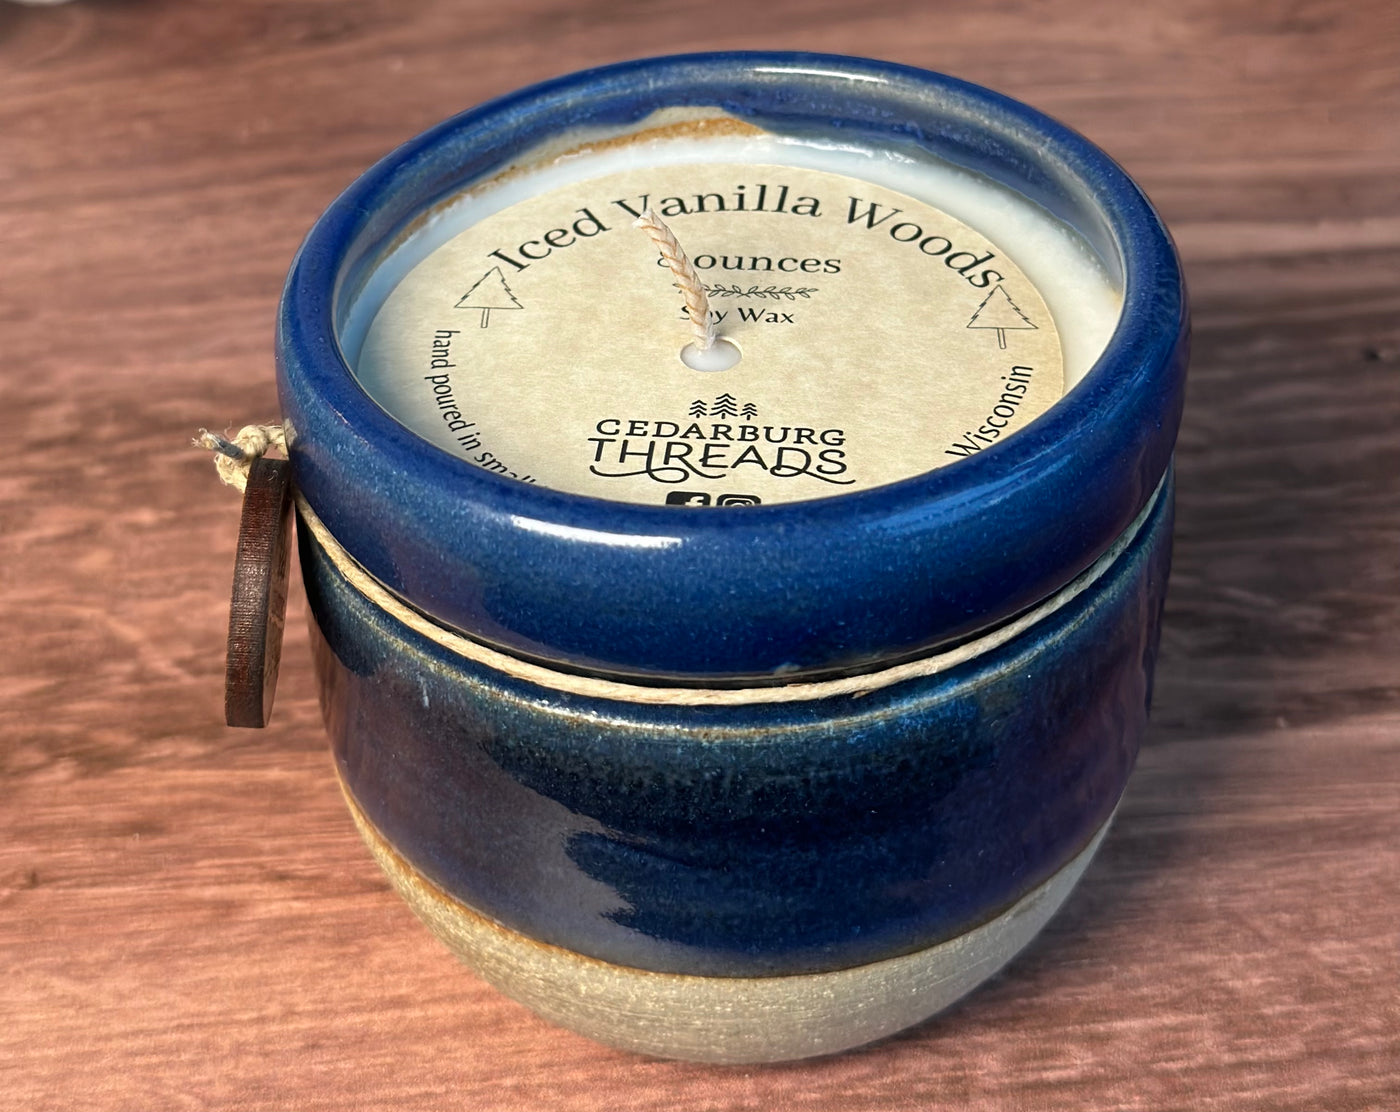 Iced Vanilla Woods hand poured soy candle  in an 8 ounce blue ceramic vessel